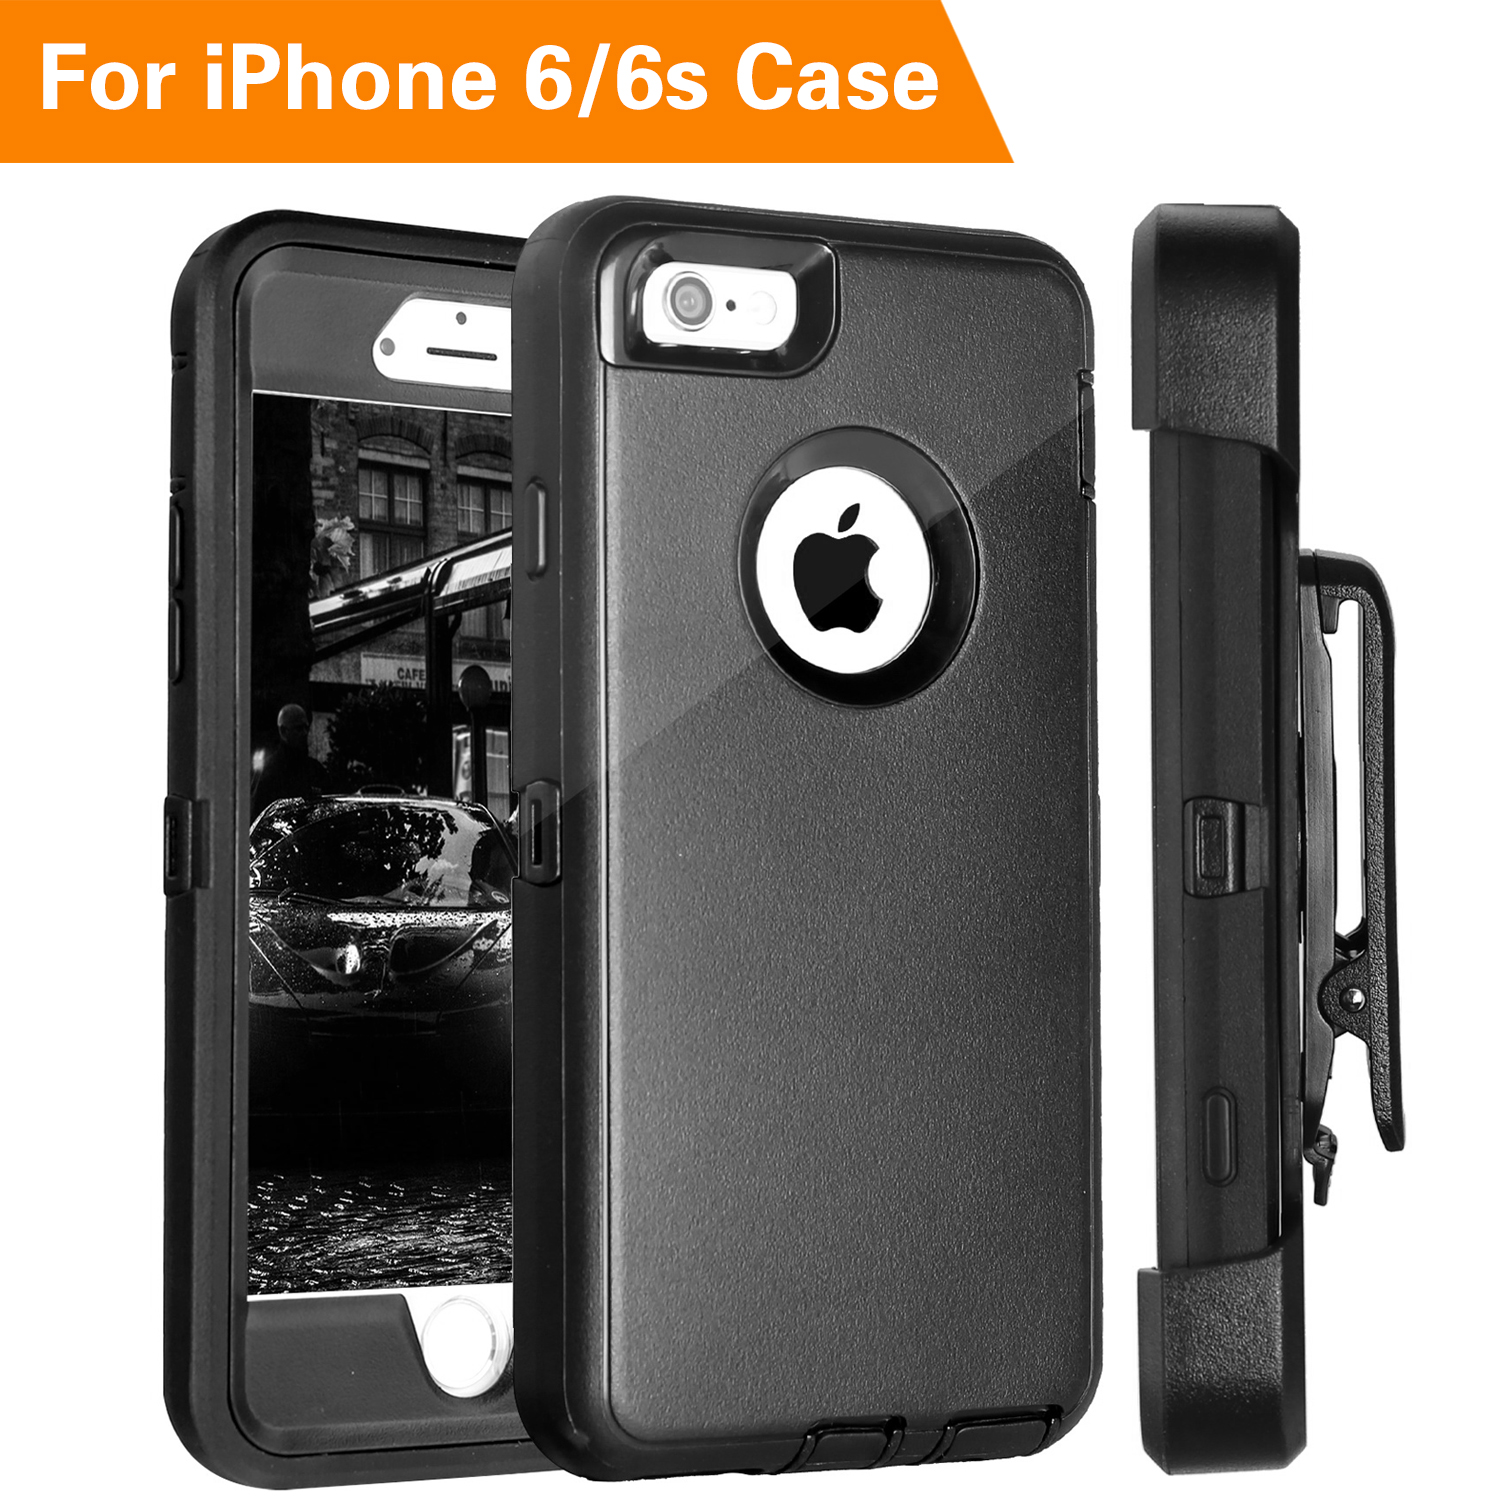 iPhone 5 Case, FogeekHeavy Duty PC + TPU Combo Protective Defender Body Armor Case for iPhone 5 & iPhone 5S(Orange/Green)